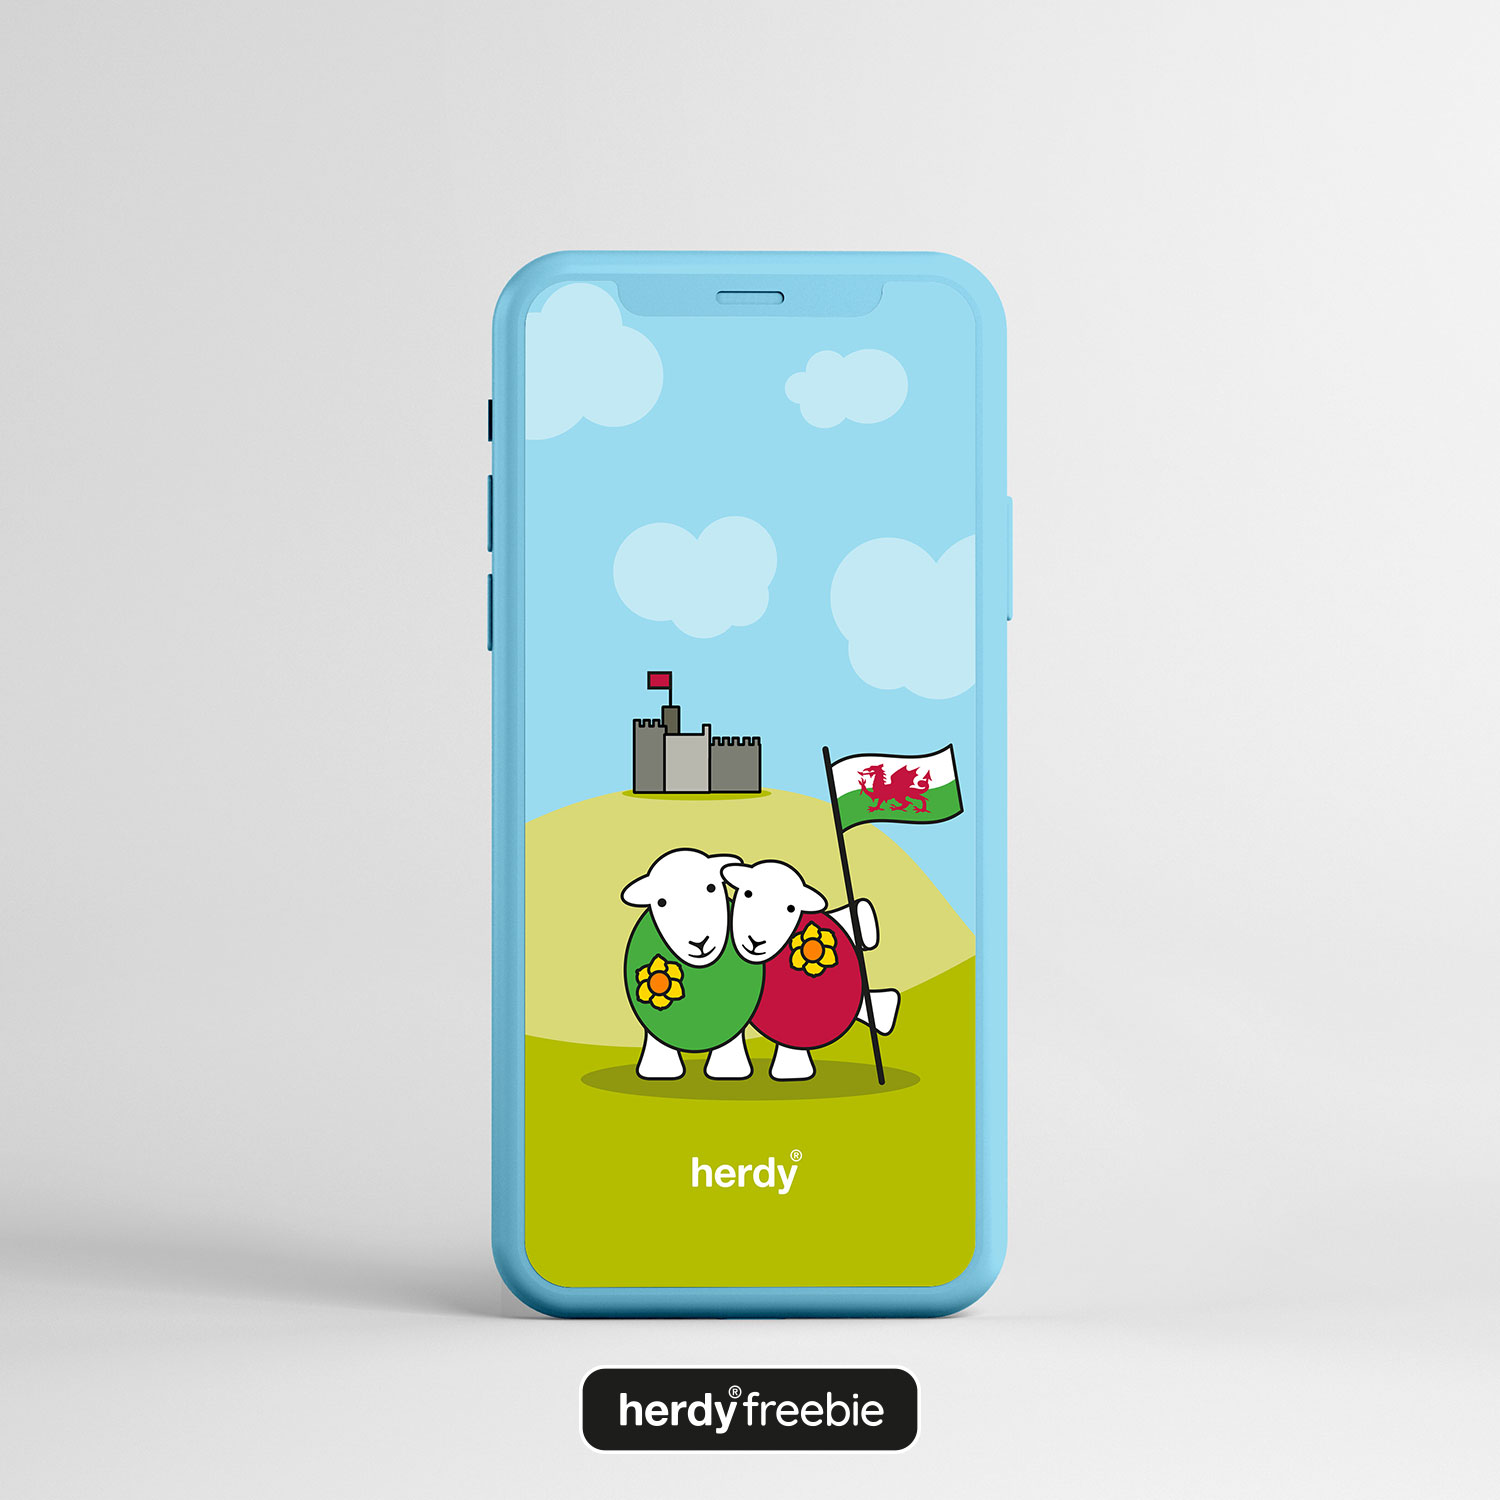 St Davids Day free mobile phone download